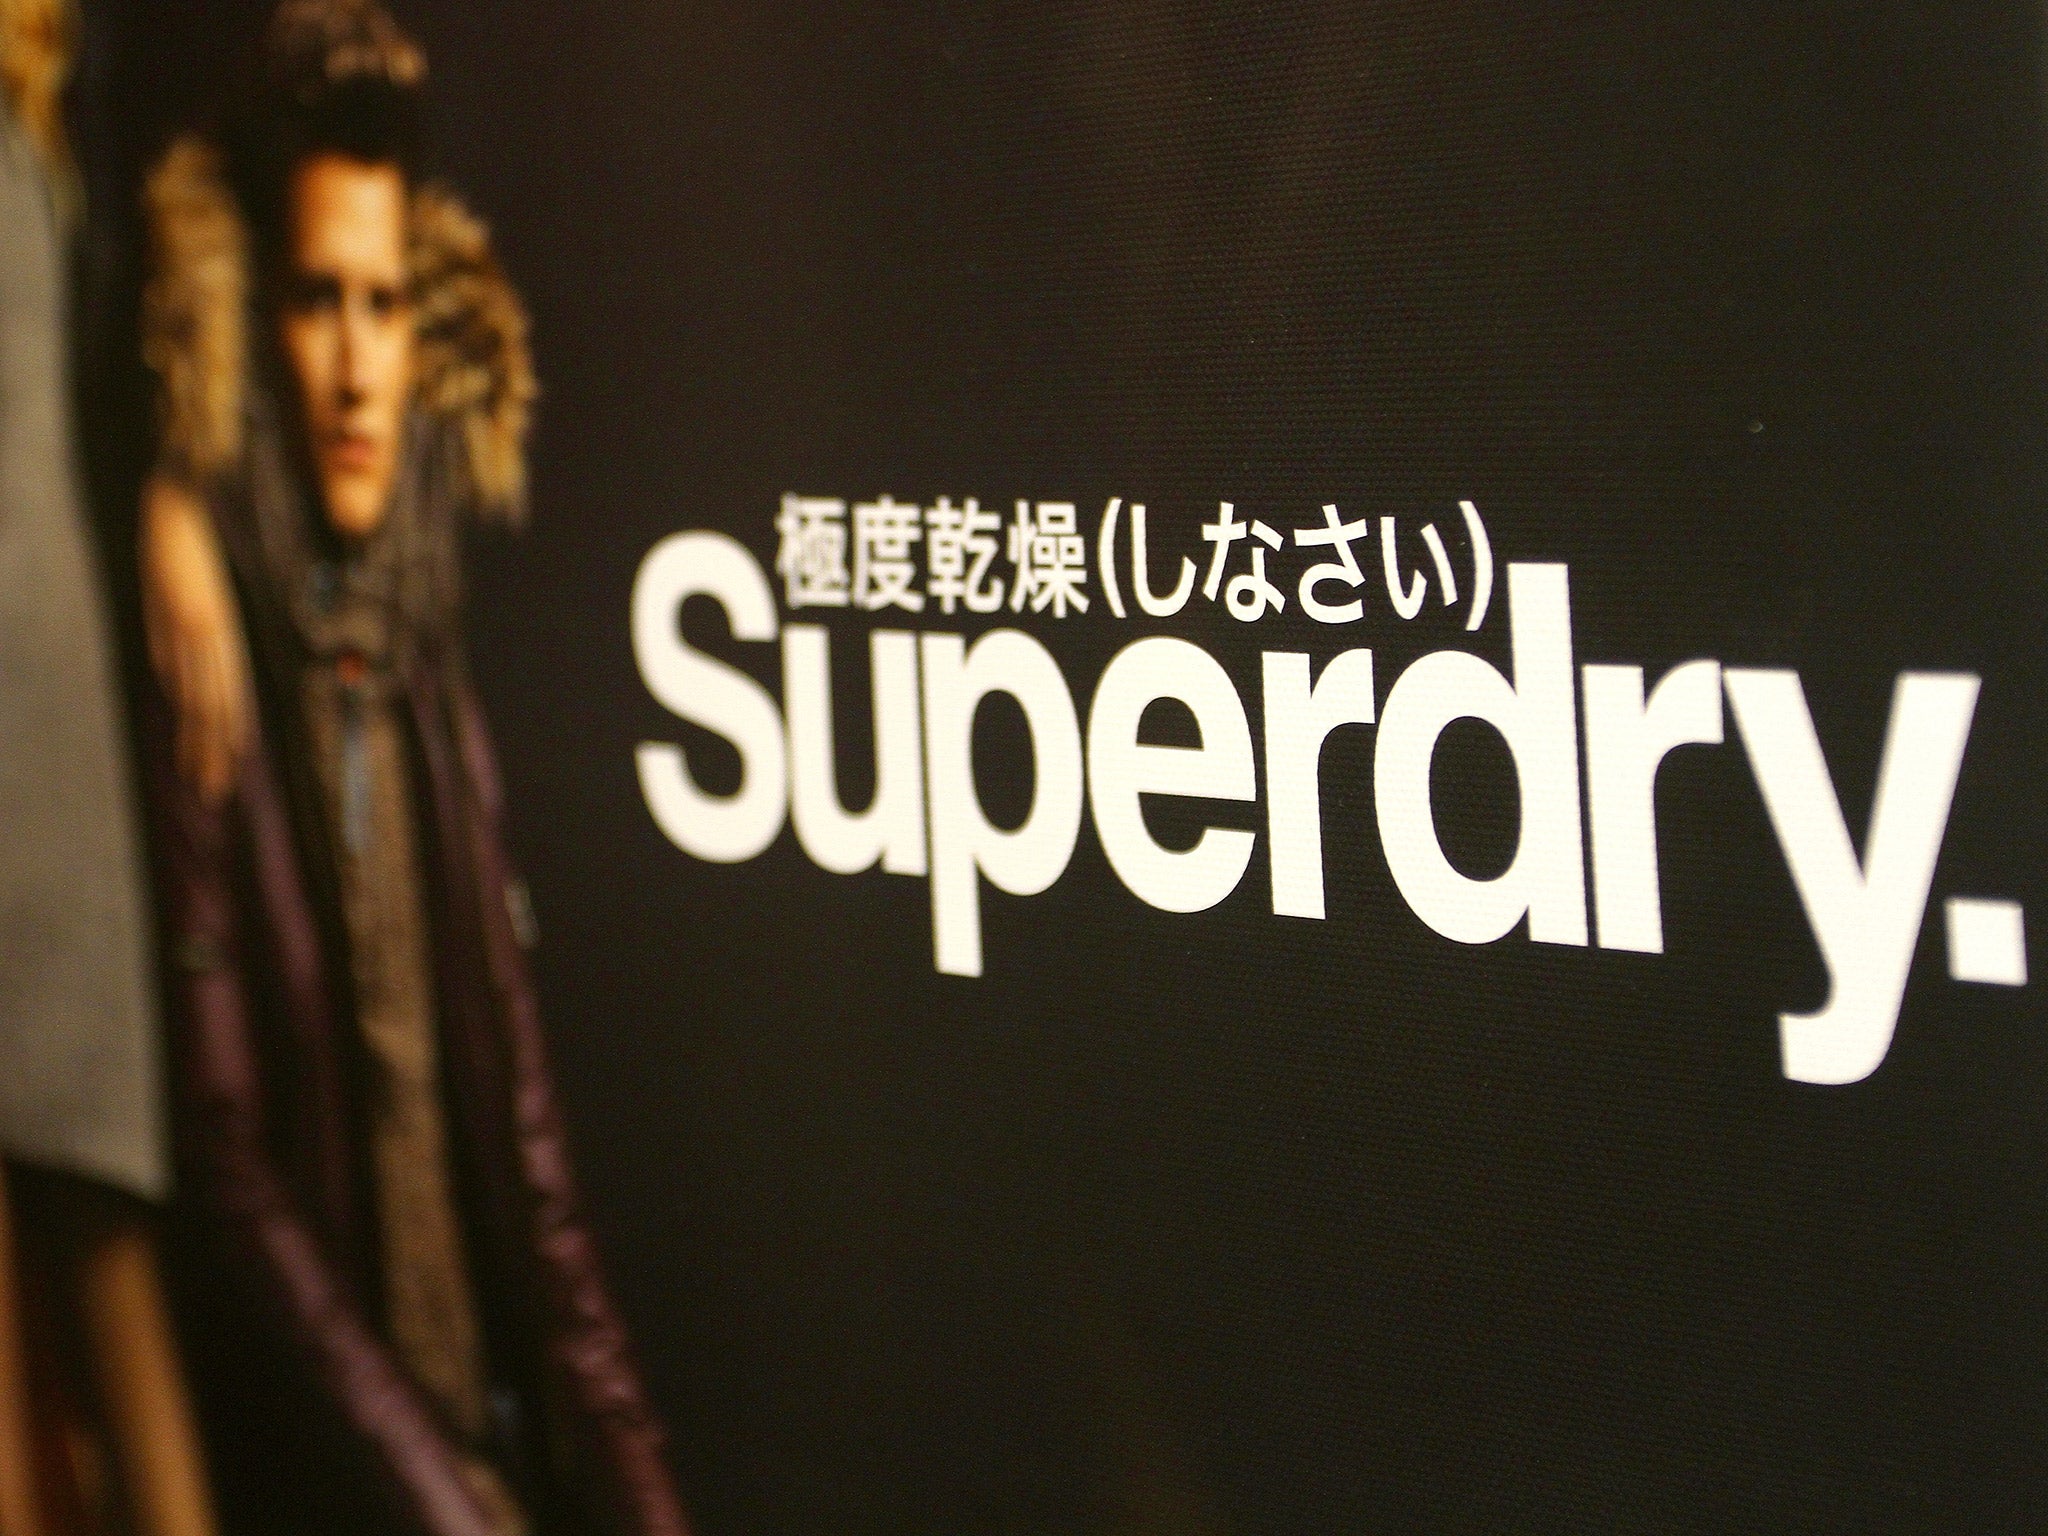 Superdry has been growing its sports apparel business and recently opened its first shop dedicated to sports clothing